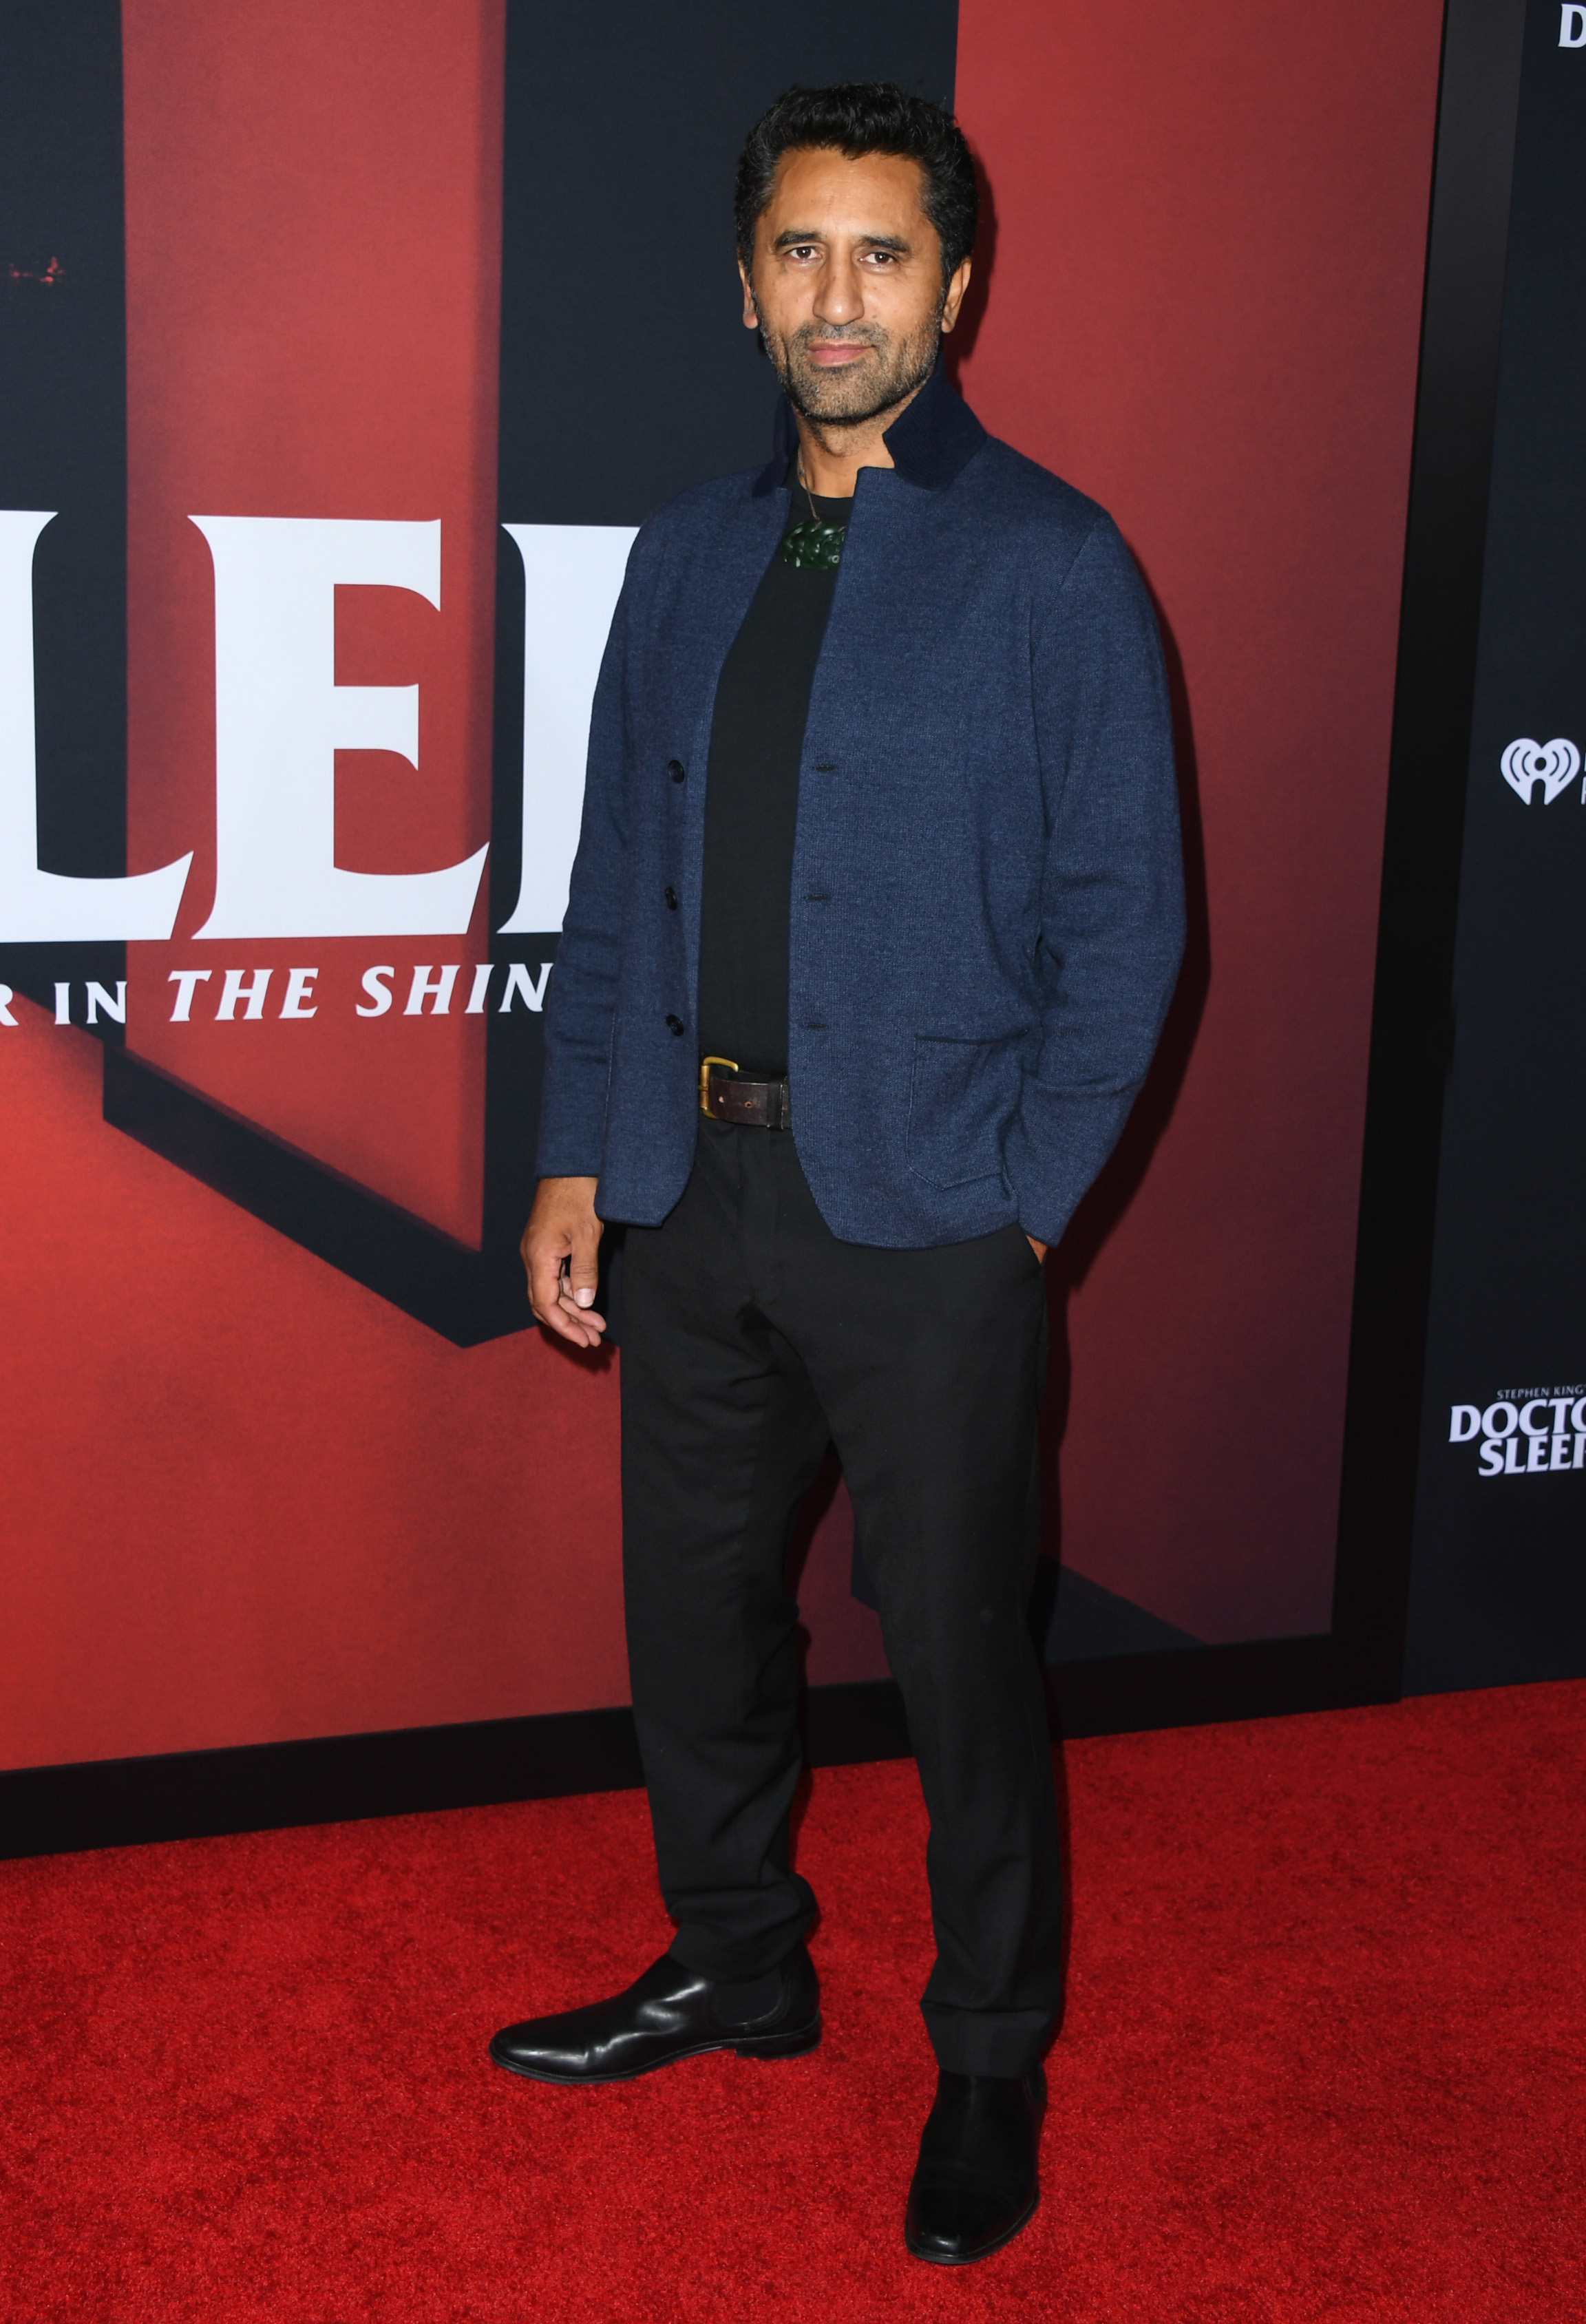 Cliff Curtis at the premiere of Warner Bros Pictures' "Doctor Sleep" on October 29, 2019, in Los Angeles, California. | Source: Getty Images